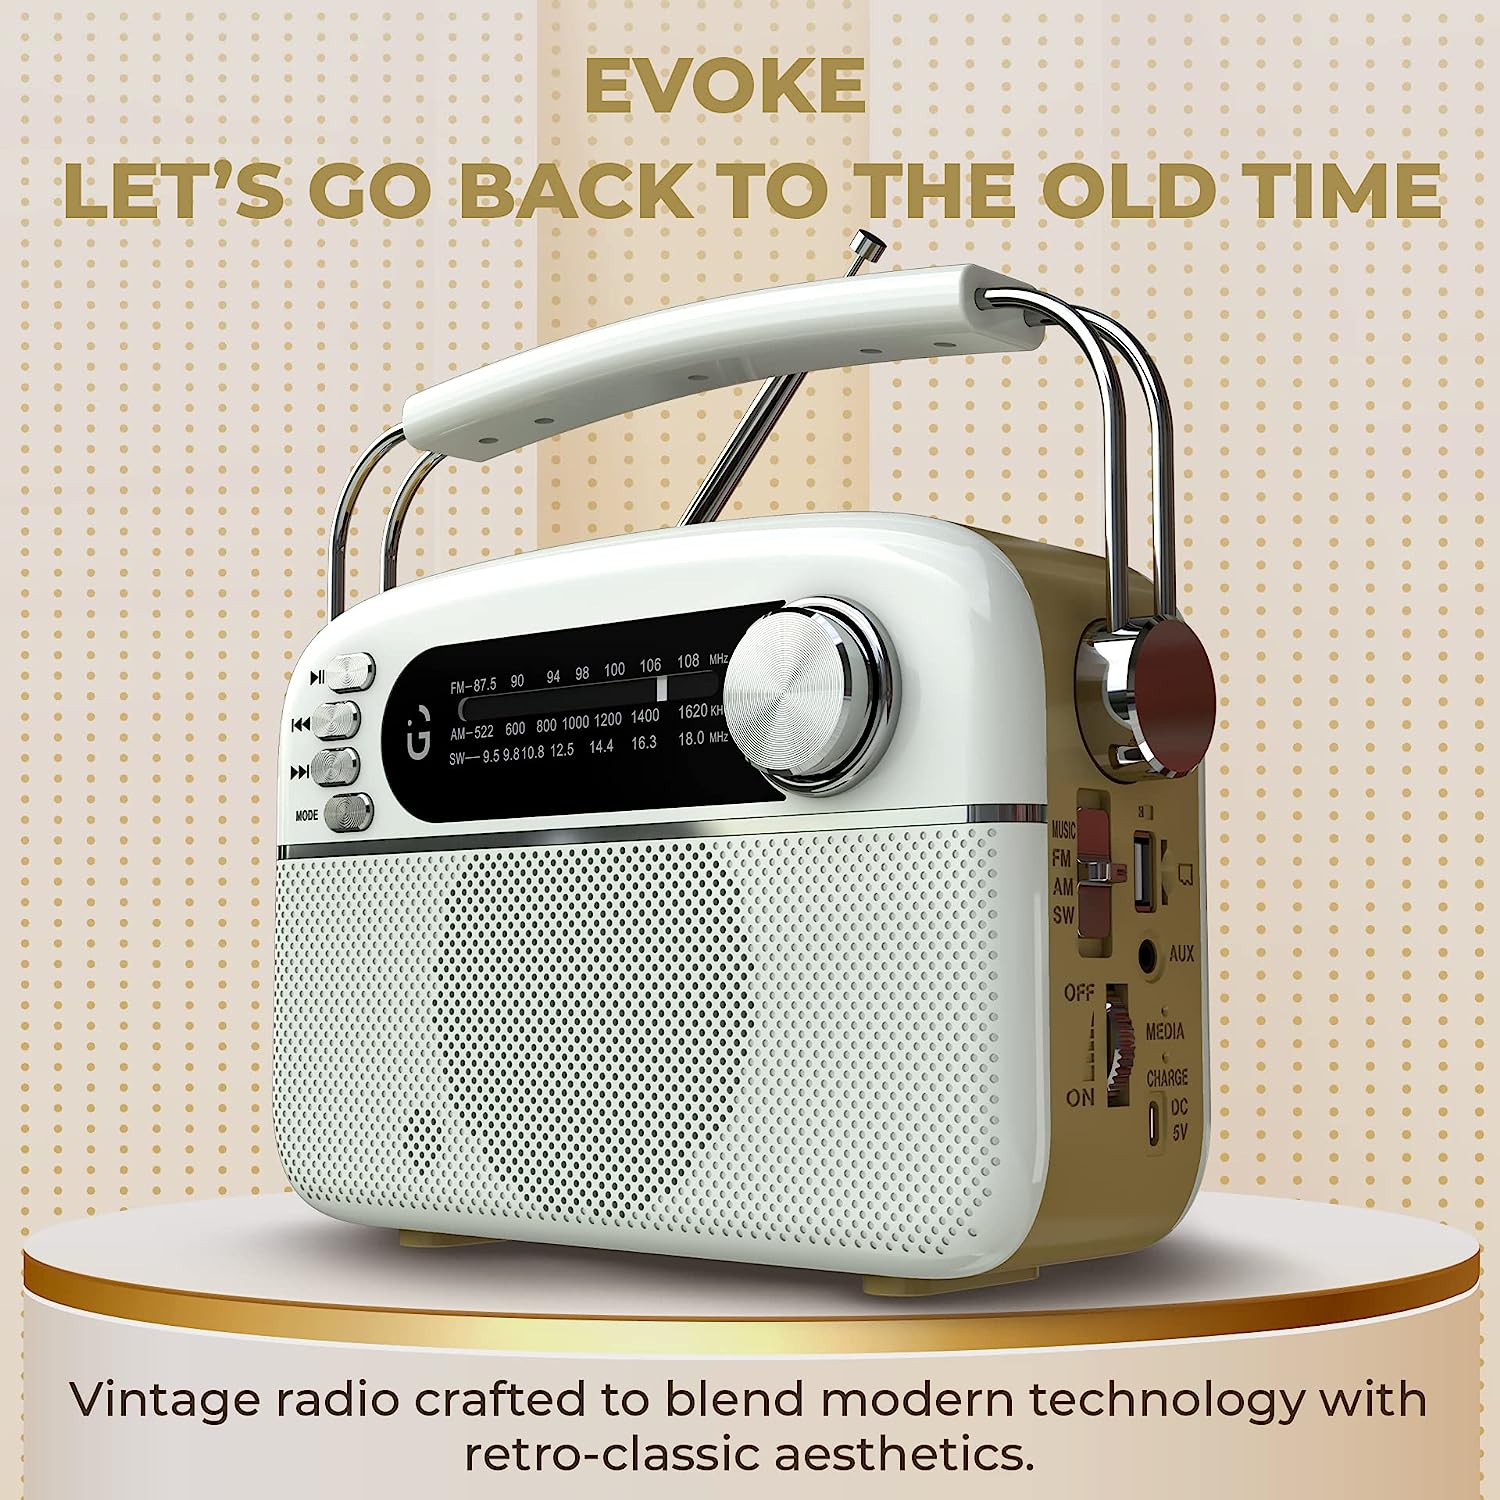 iGear Evoke Retro Modern style Radio and MP3 player with FM/AM/SW, 3 bands, Bluetooth speaker, USB, TF/SD Card, 1200mAh rechargeable battery, Solar charger